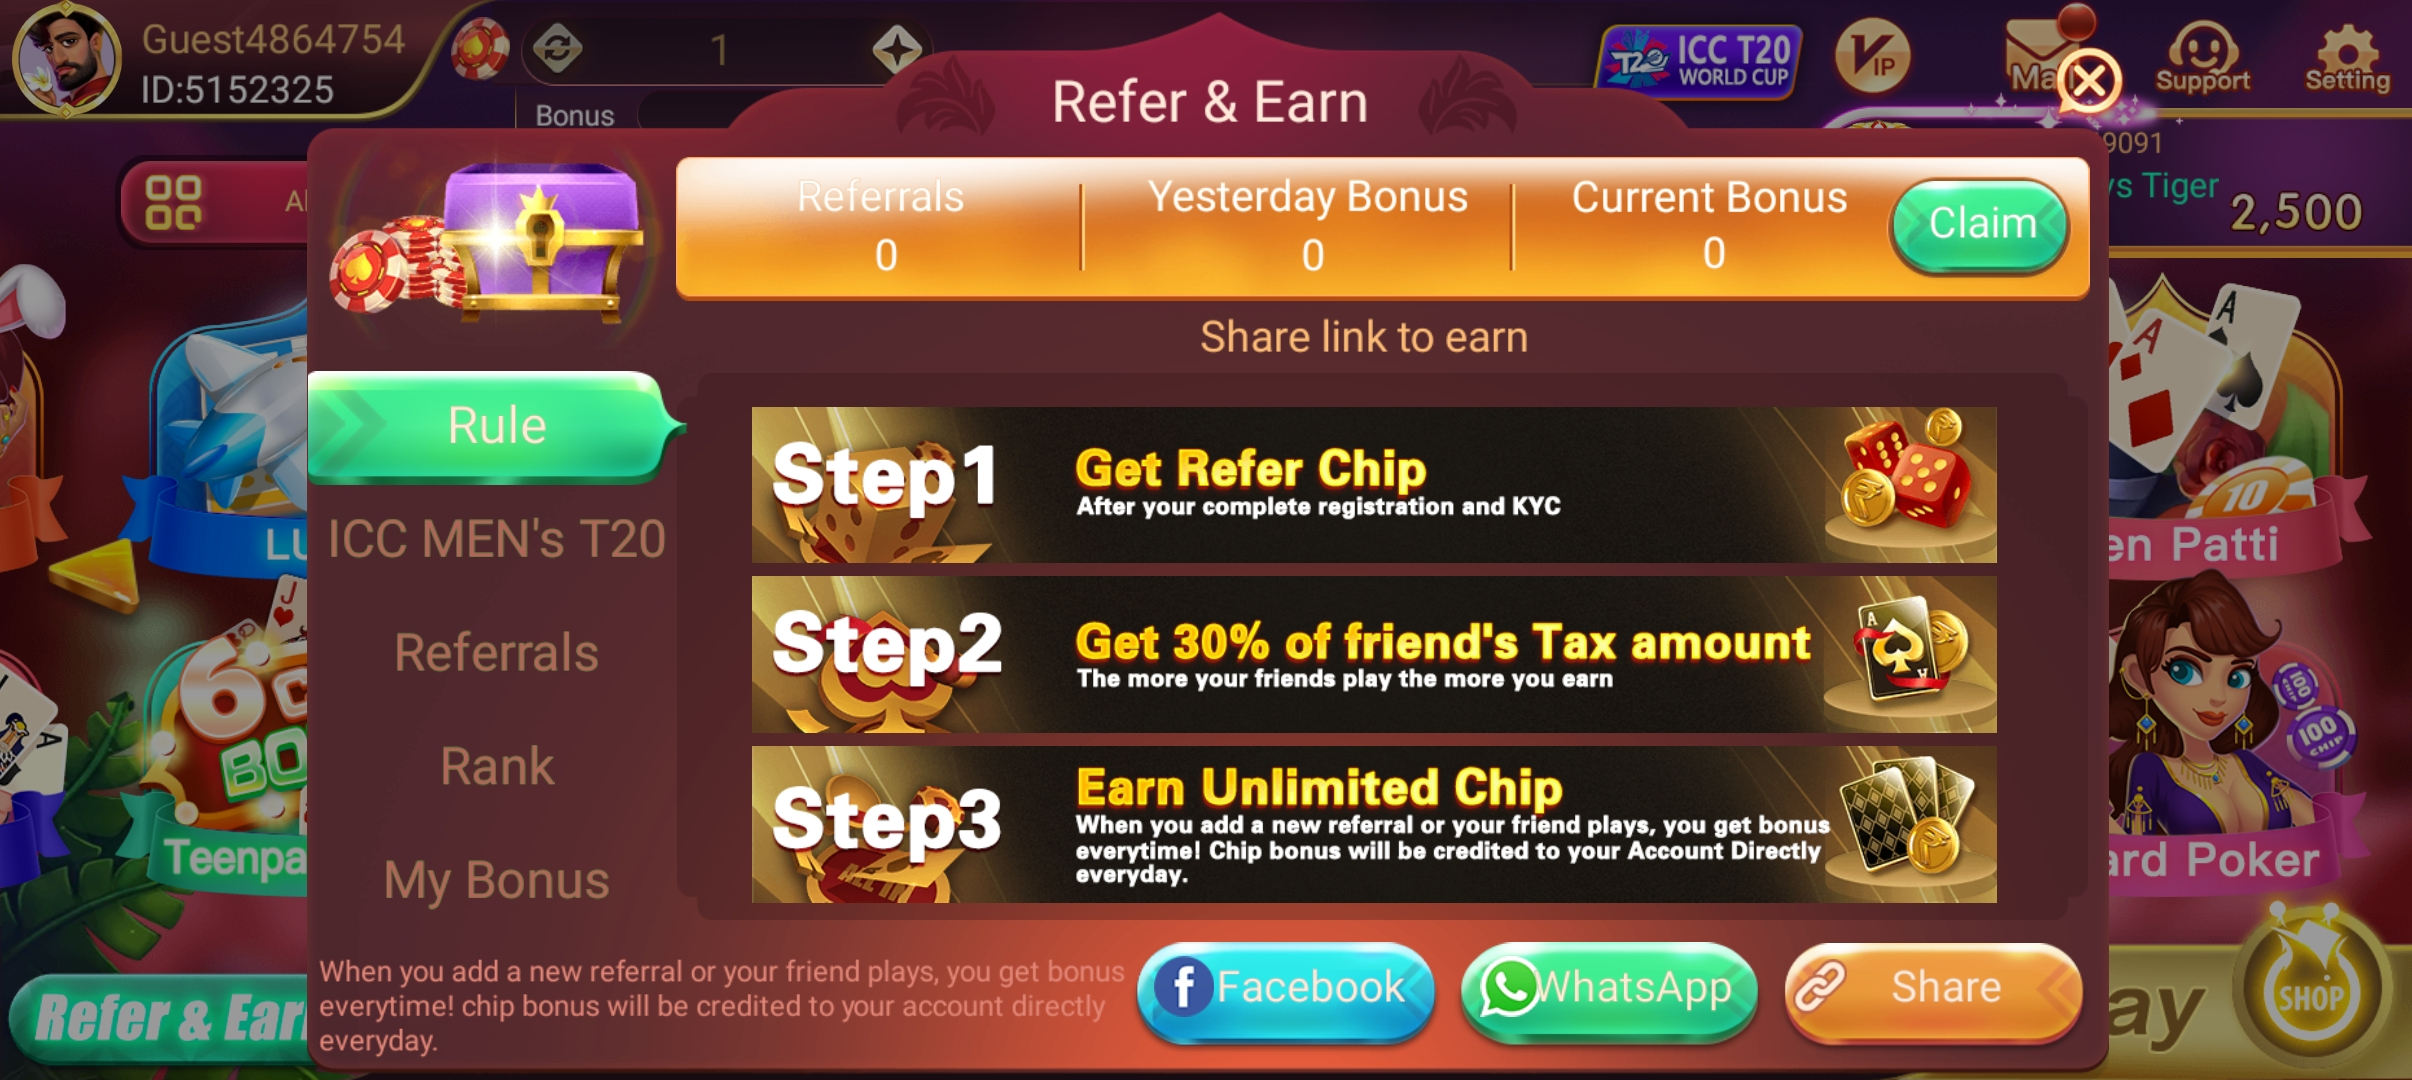 Refer & Earn Money From Rummy Most